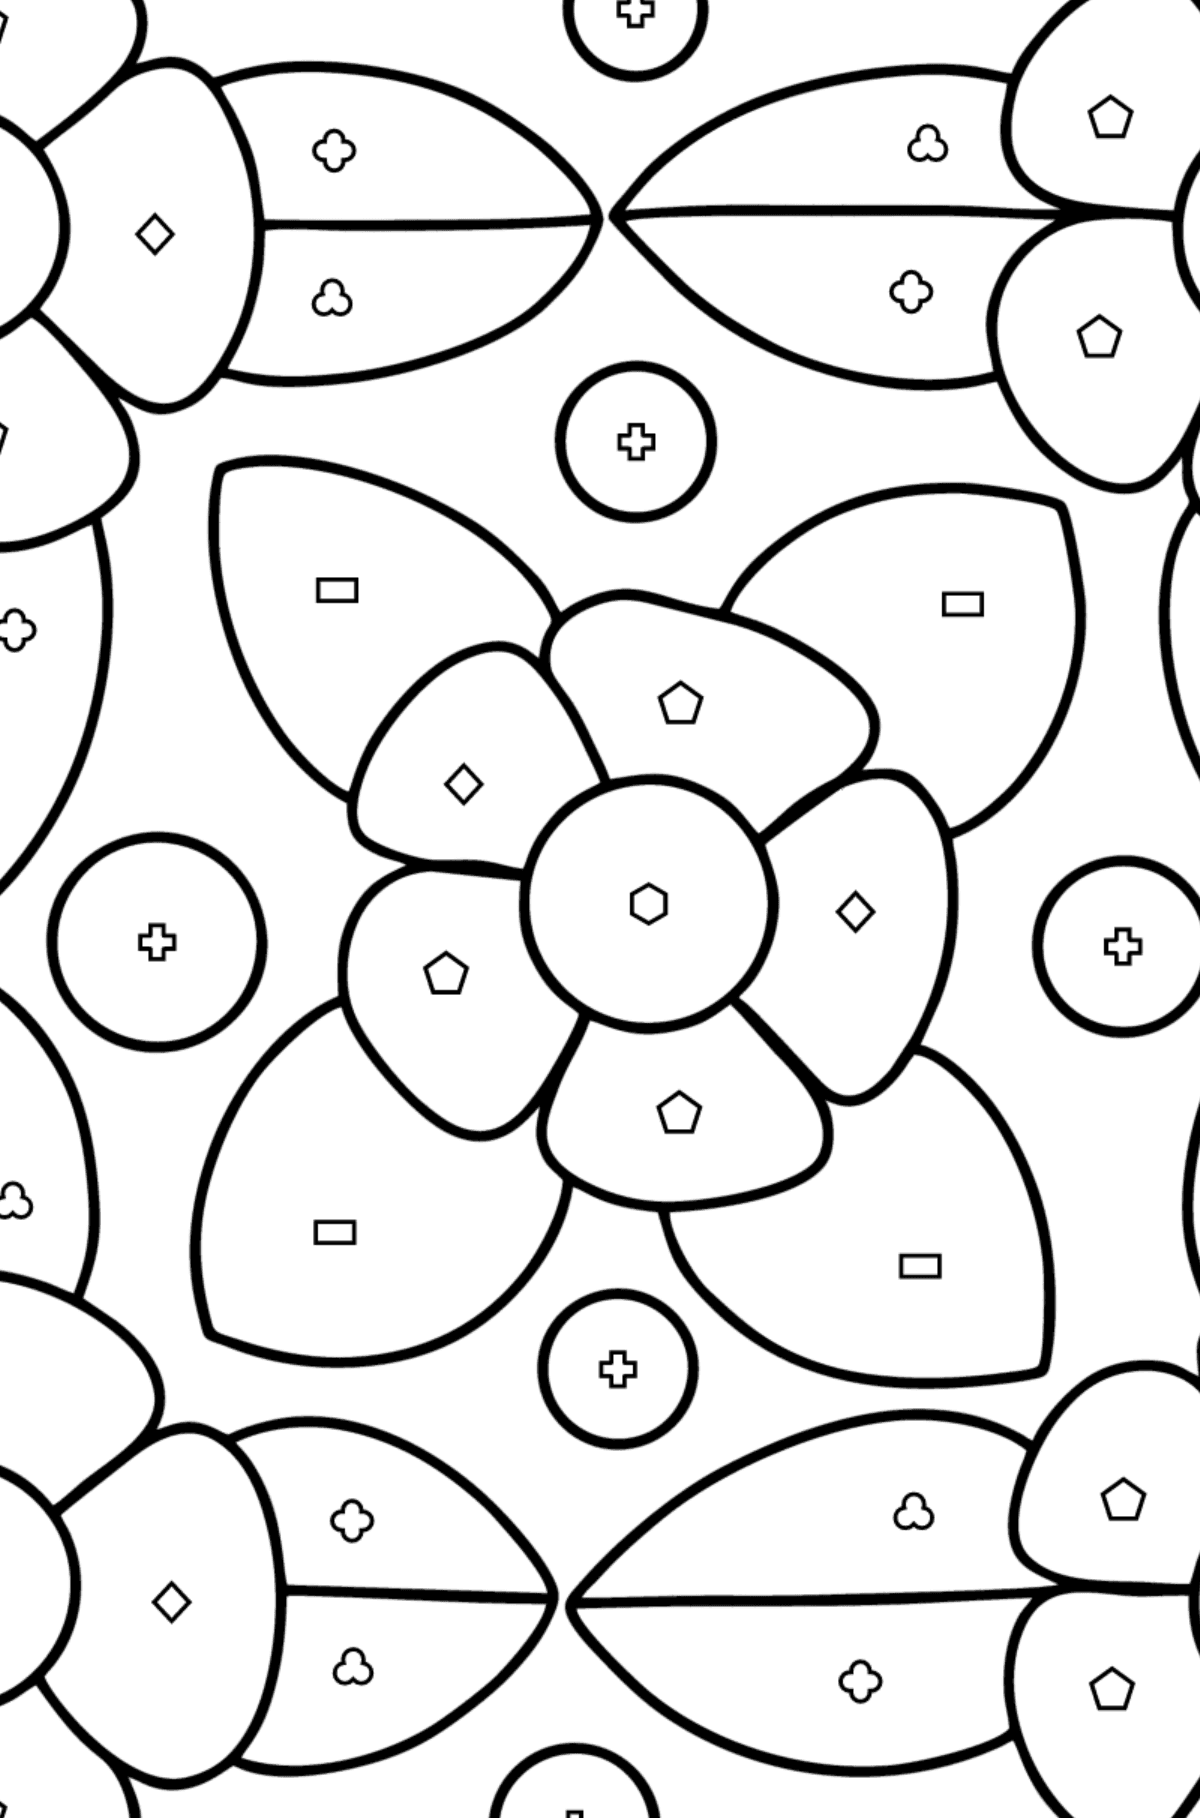 Difficult coloring pattern for kids - Coloring by Geometric Shapes for Kids